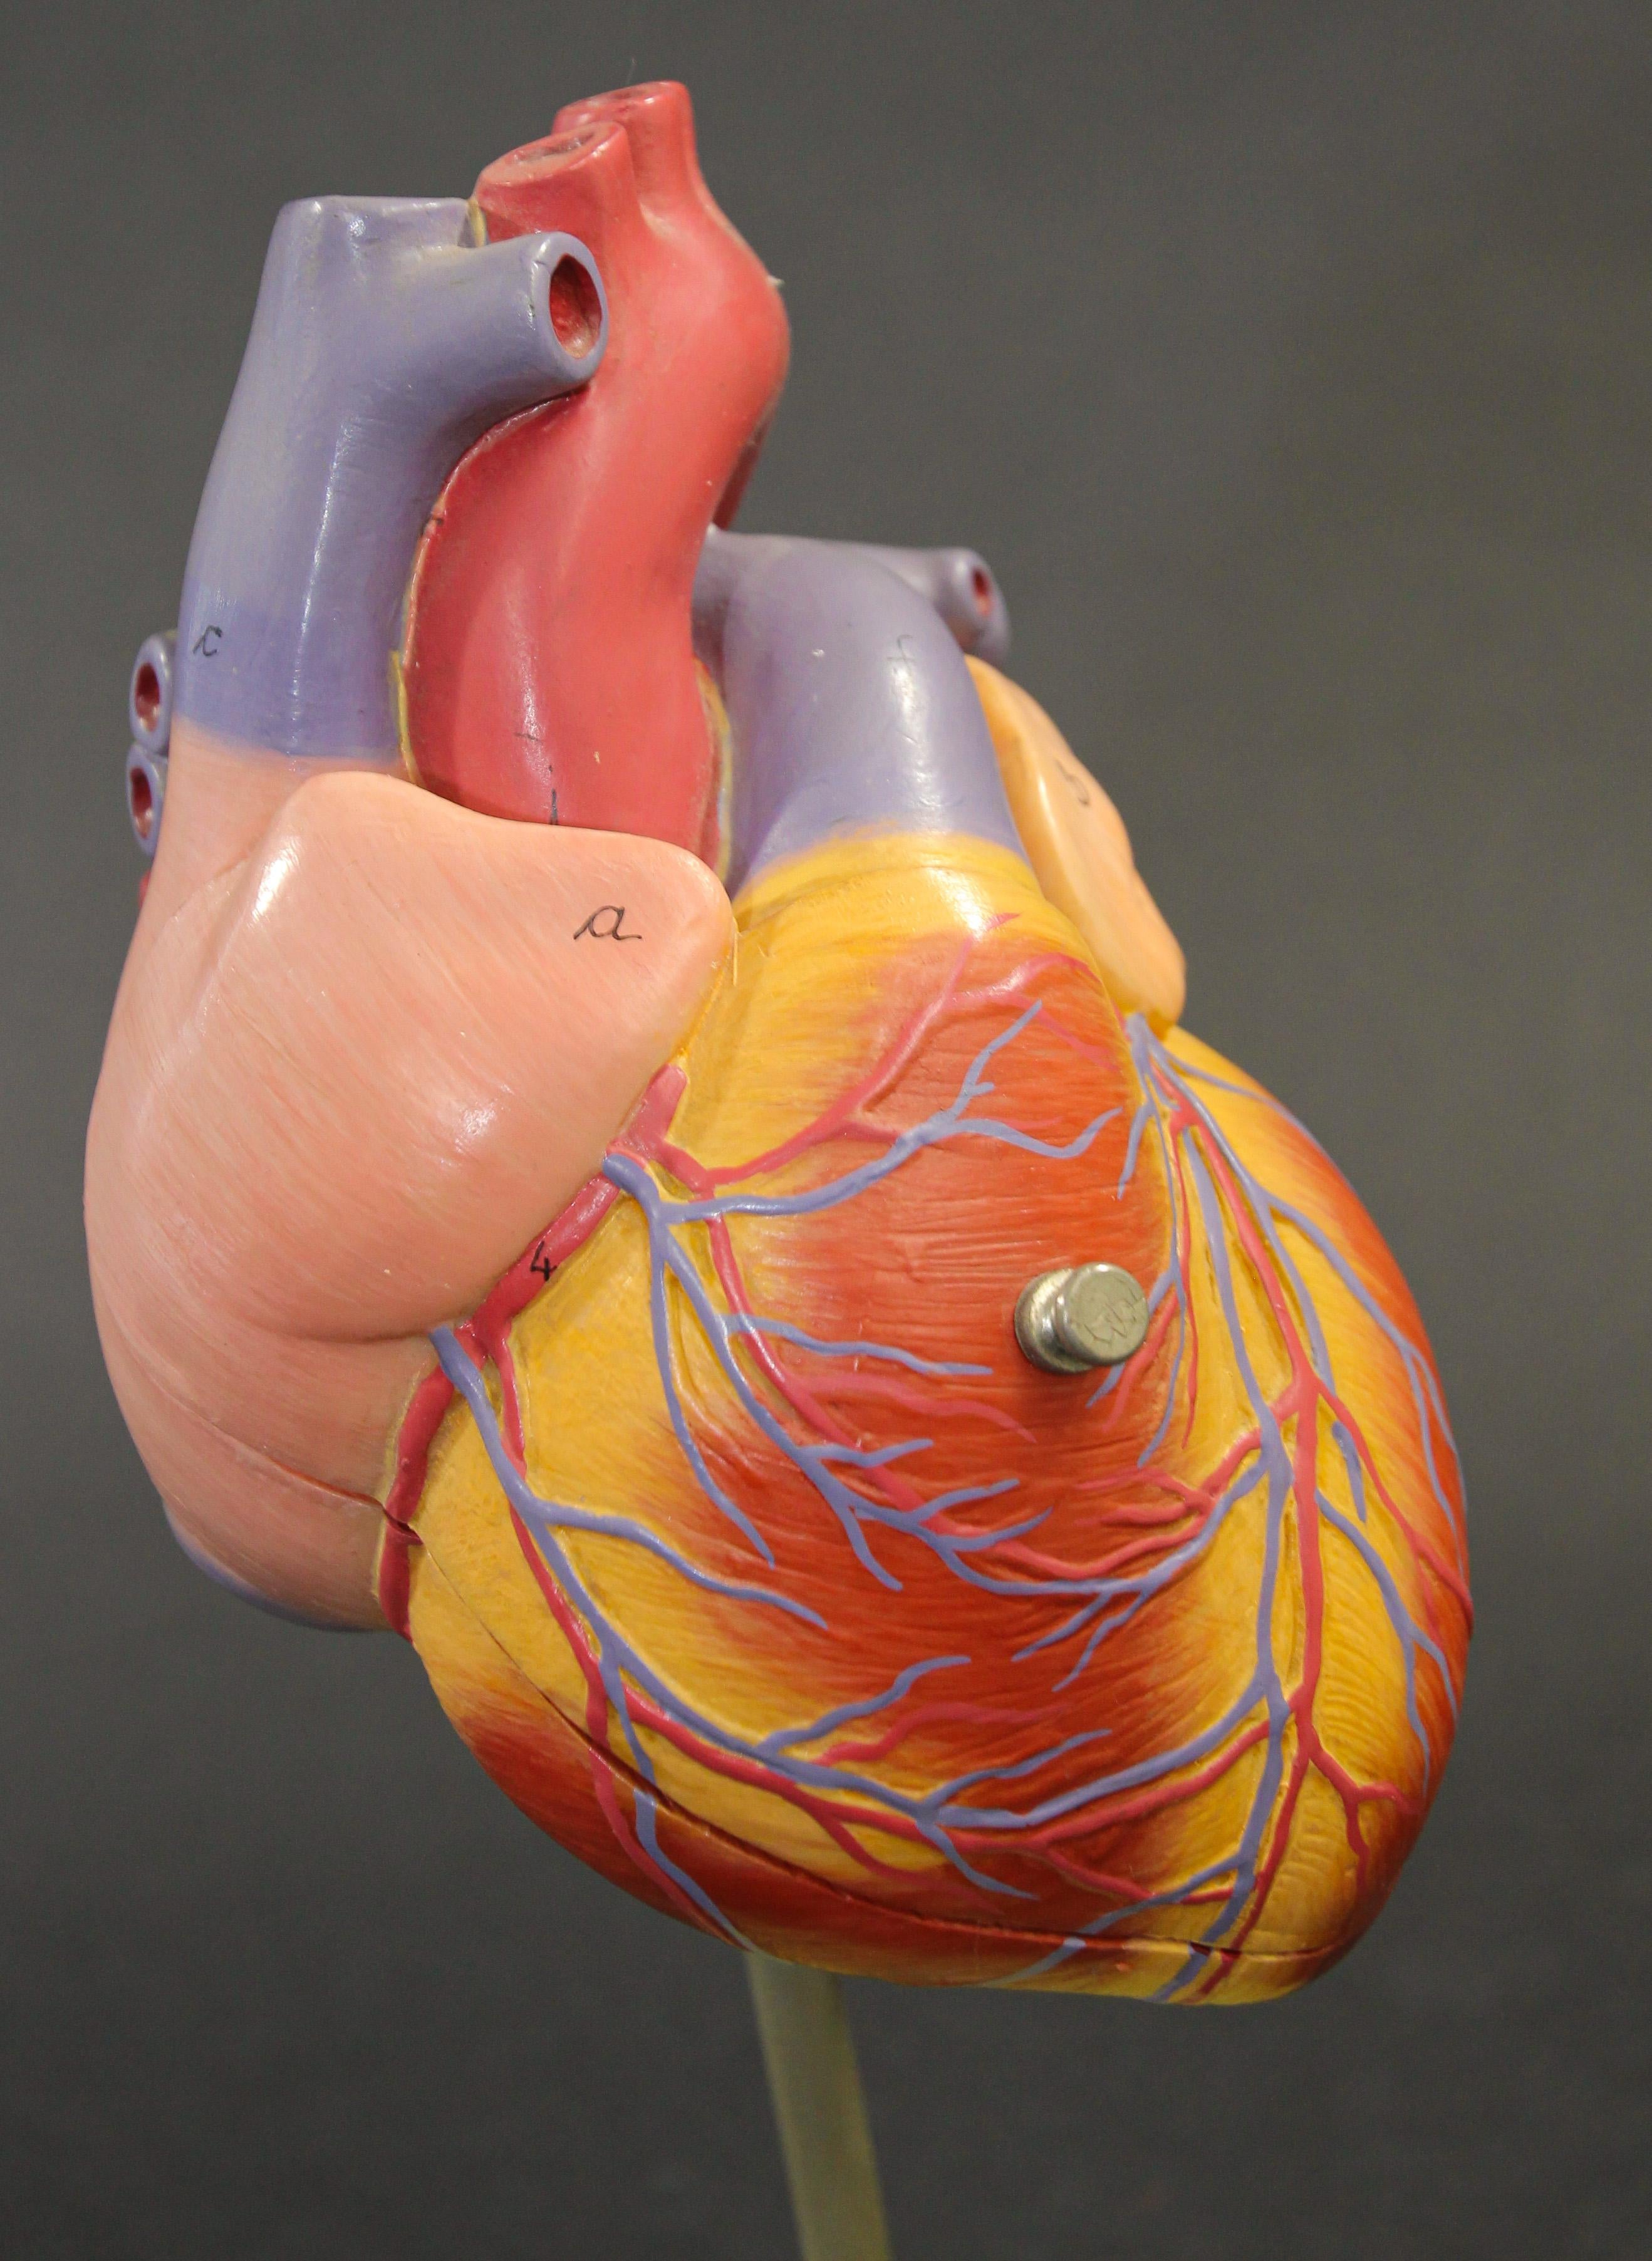 Hand-Crafted Vintage Anatomic Model of a Human Heart, West Germany, 1960